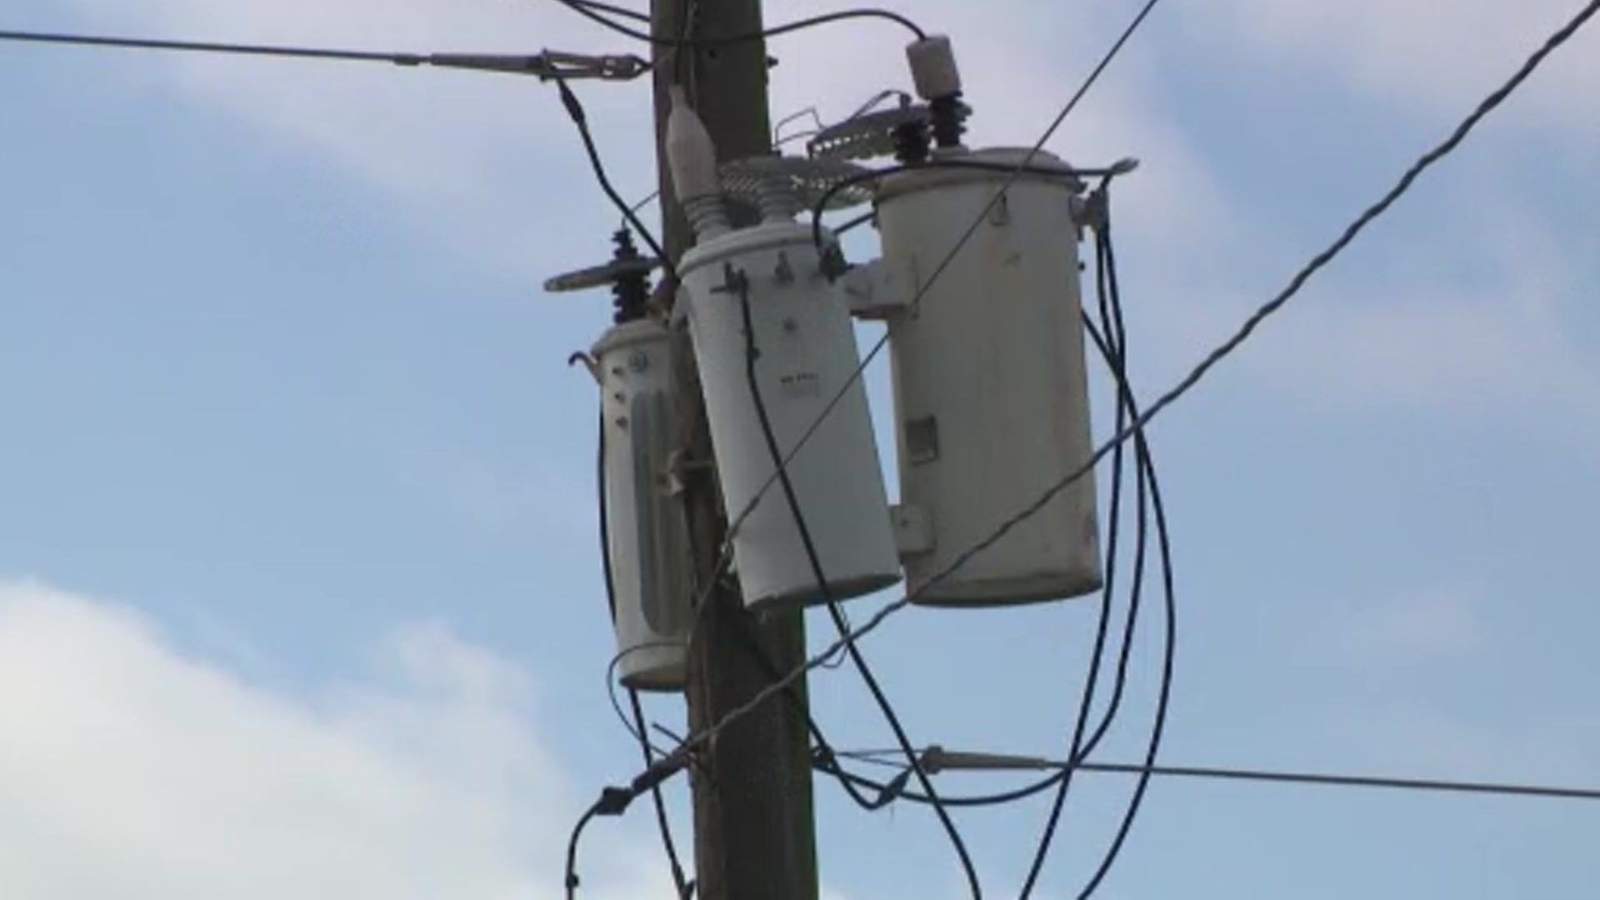 ERCOT says limited outages are still possible overnight due to snow and freezing temperatures